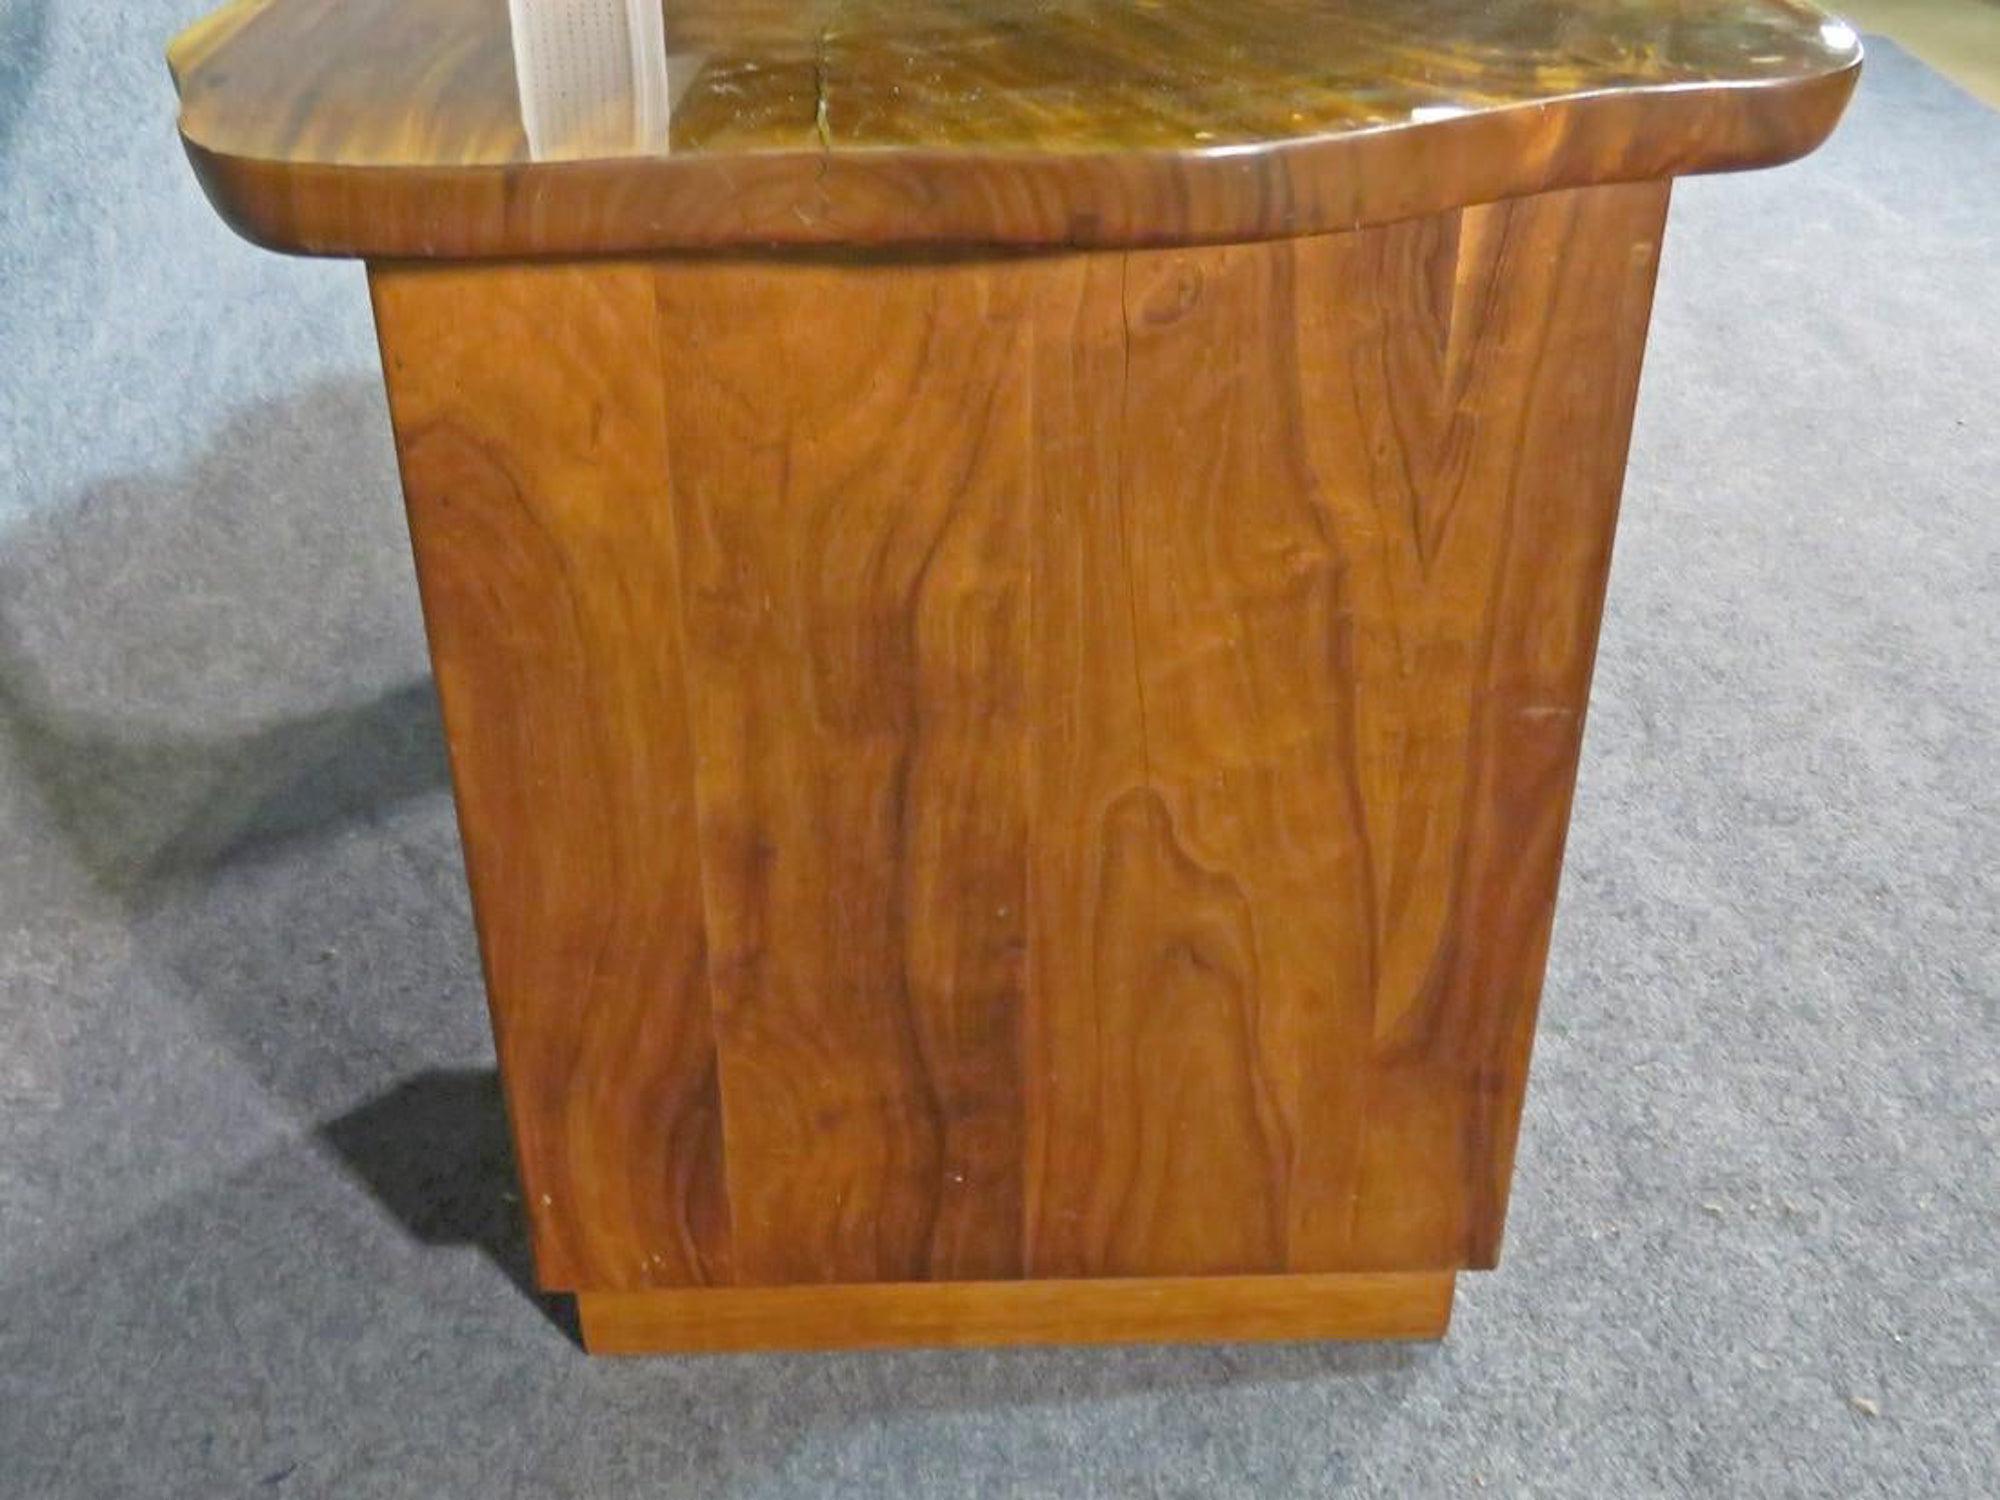 Nakashima Style Slab Desk In Good Condition For Sale In Brooklyn, NY